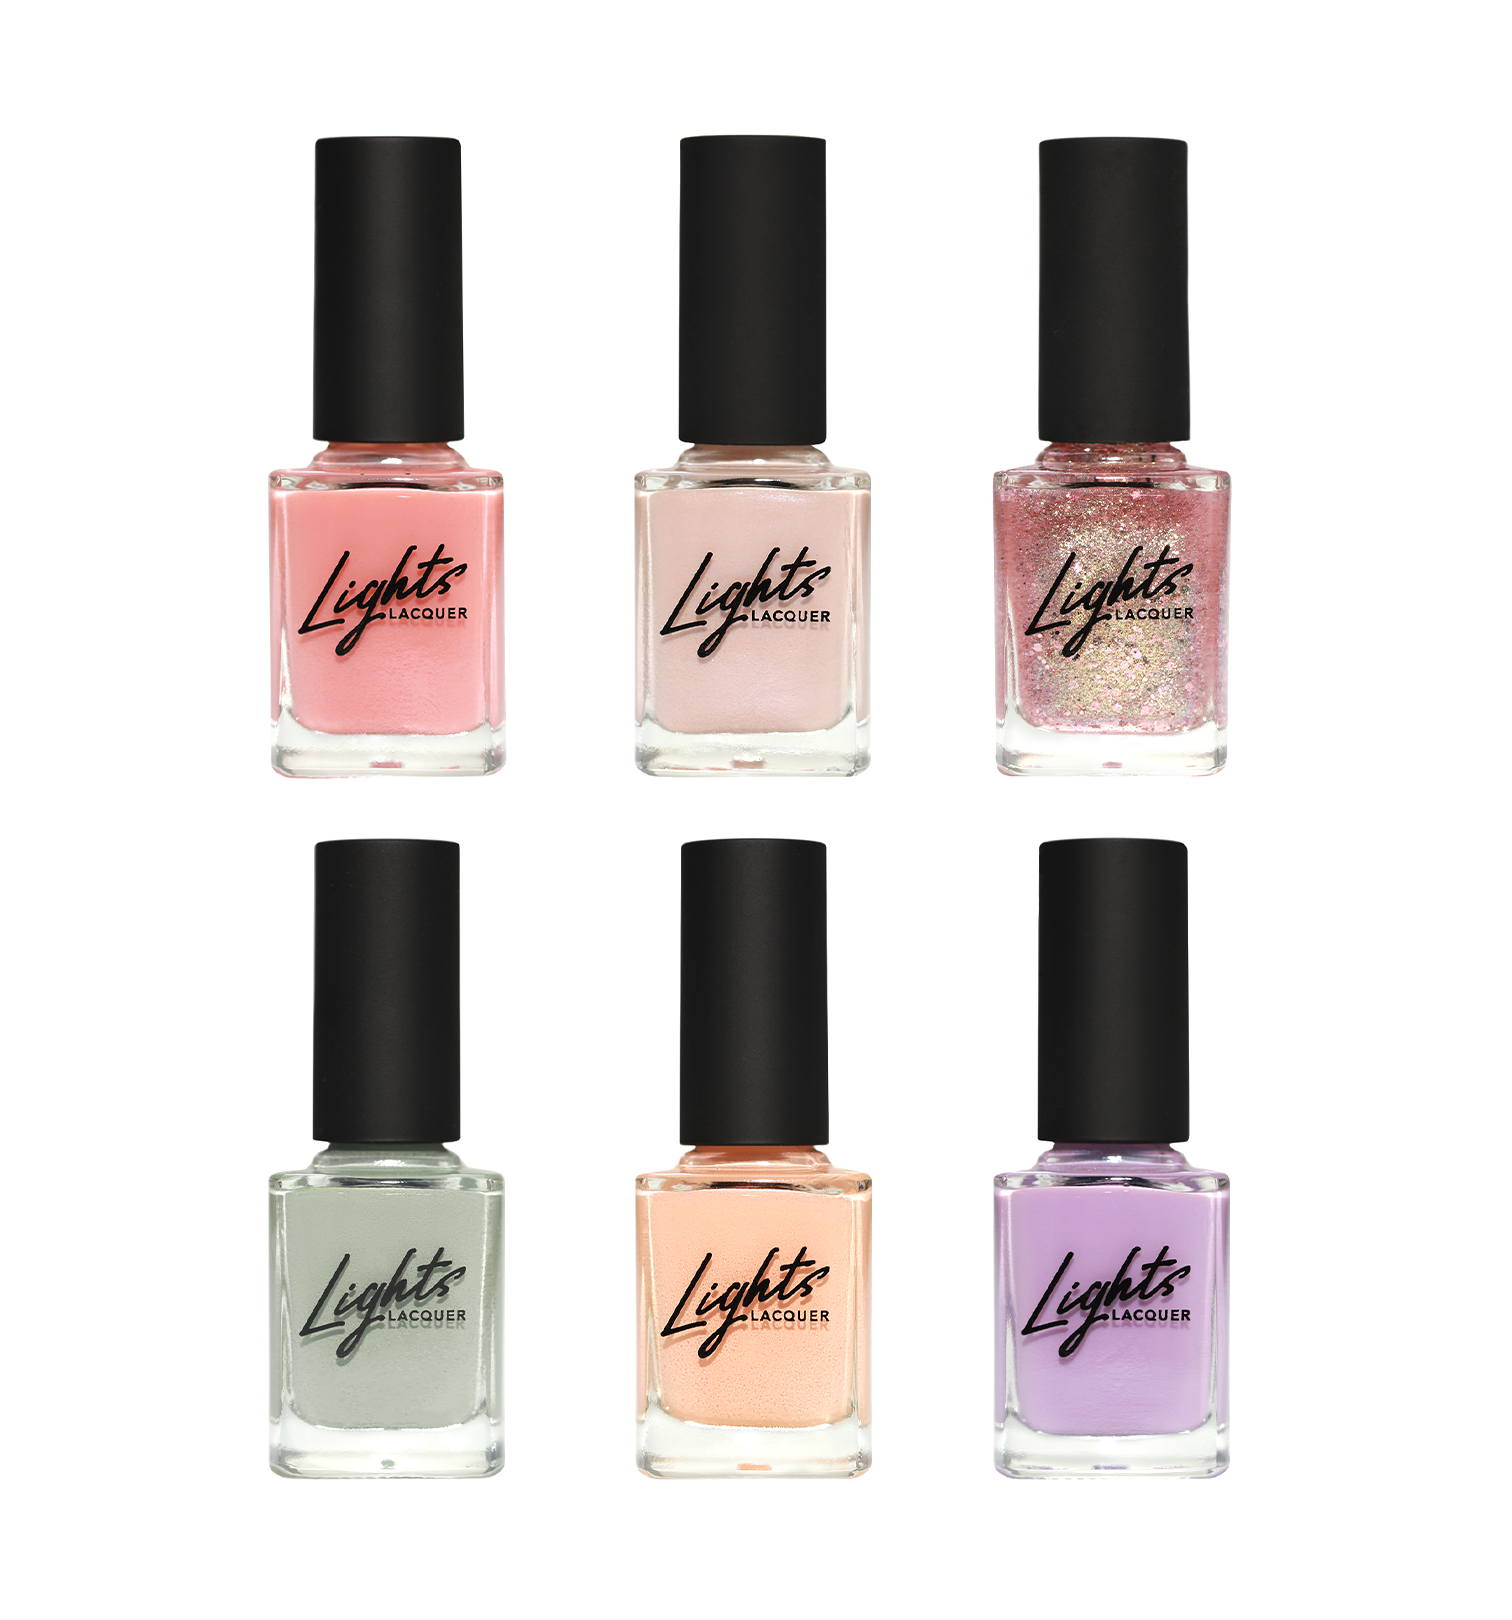 Lights Lacquer "It was All a Dream" spring 2021 collection.